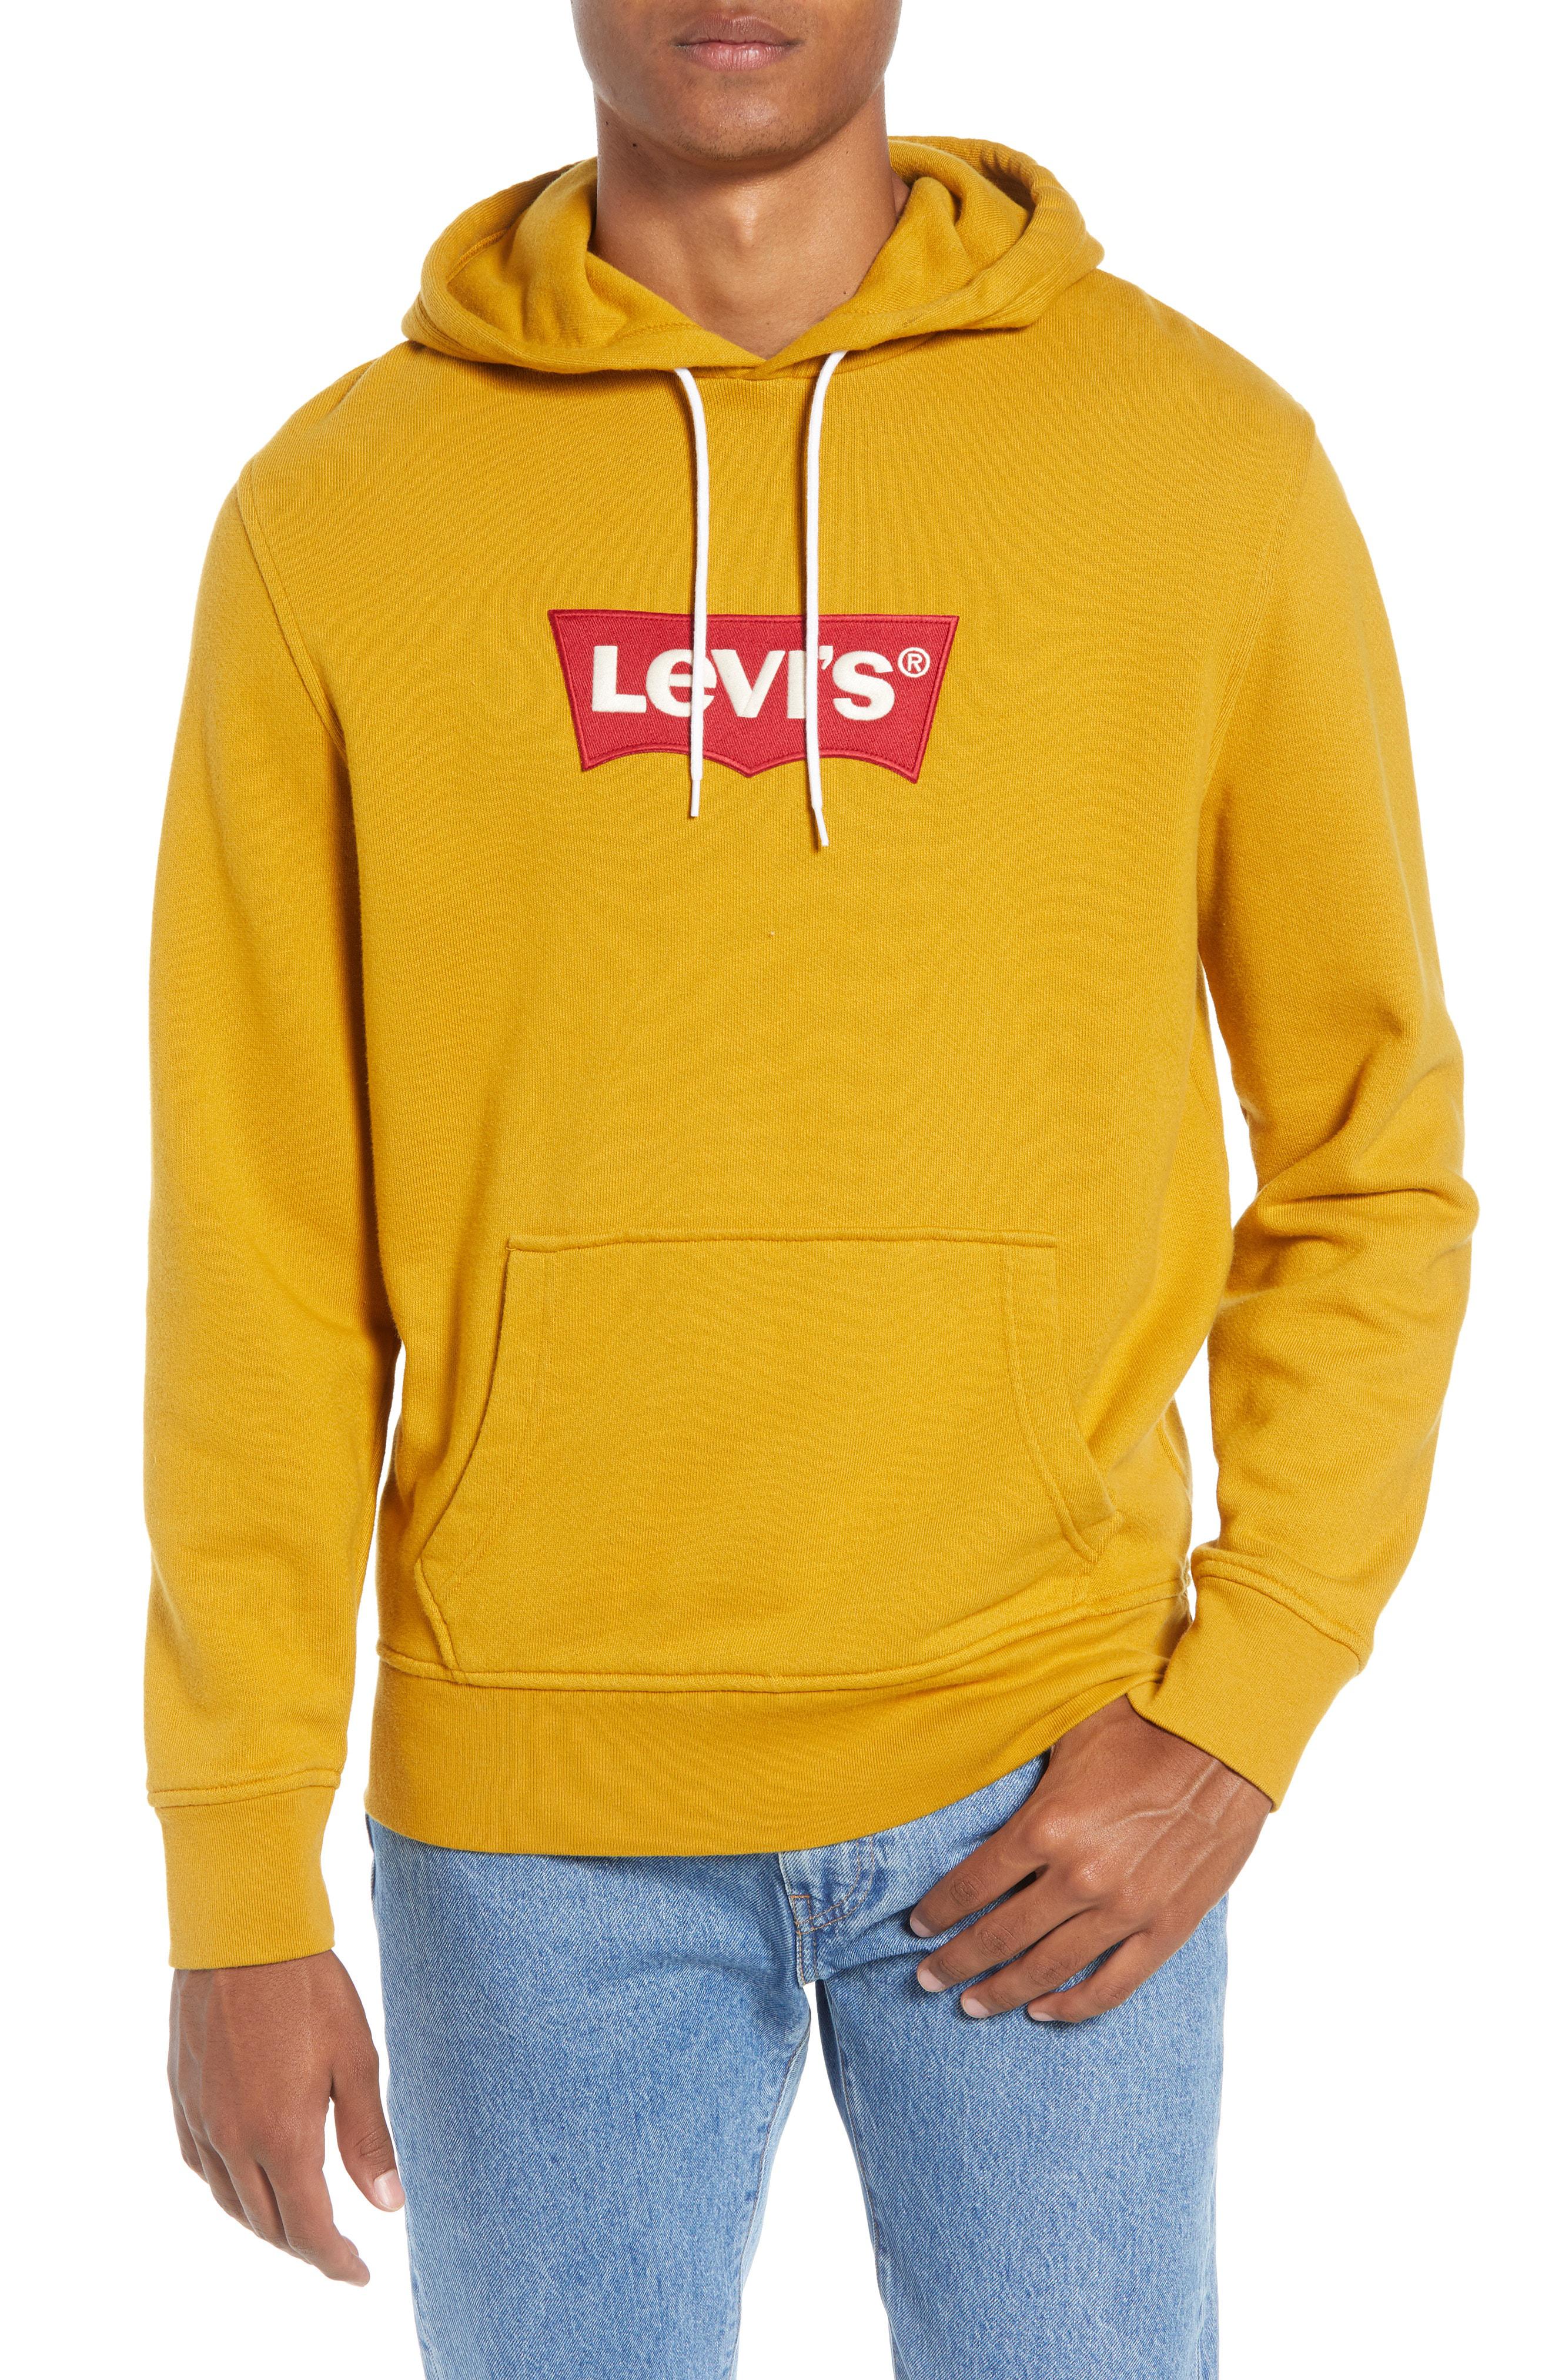 Levi's Synthetic Logo Hoodie in Mustard (Yellow) for Men - Lyst